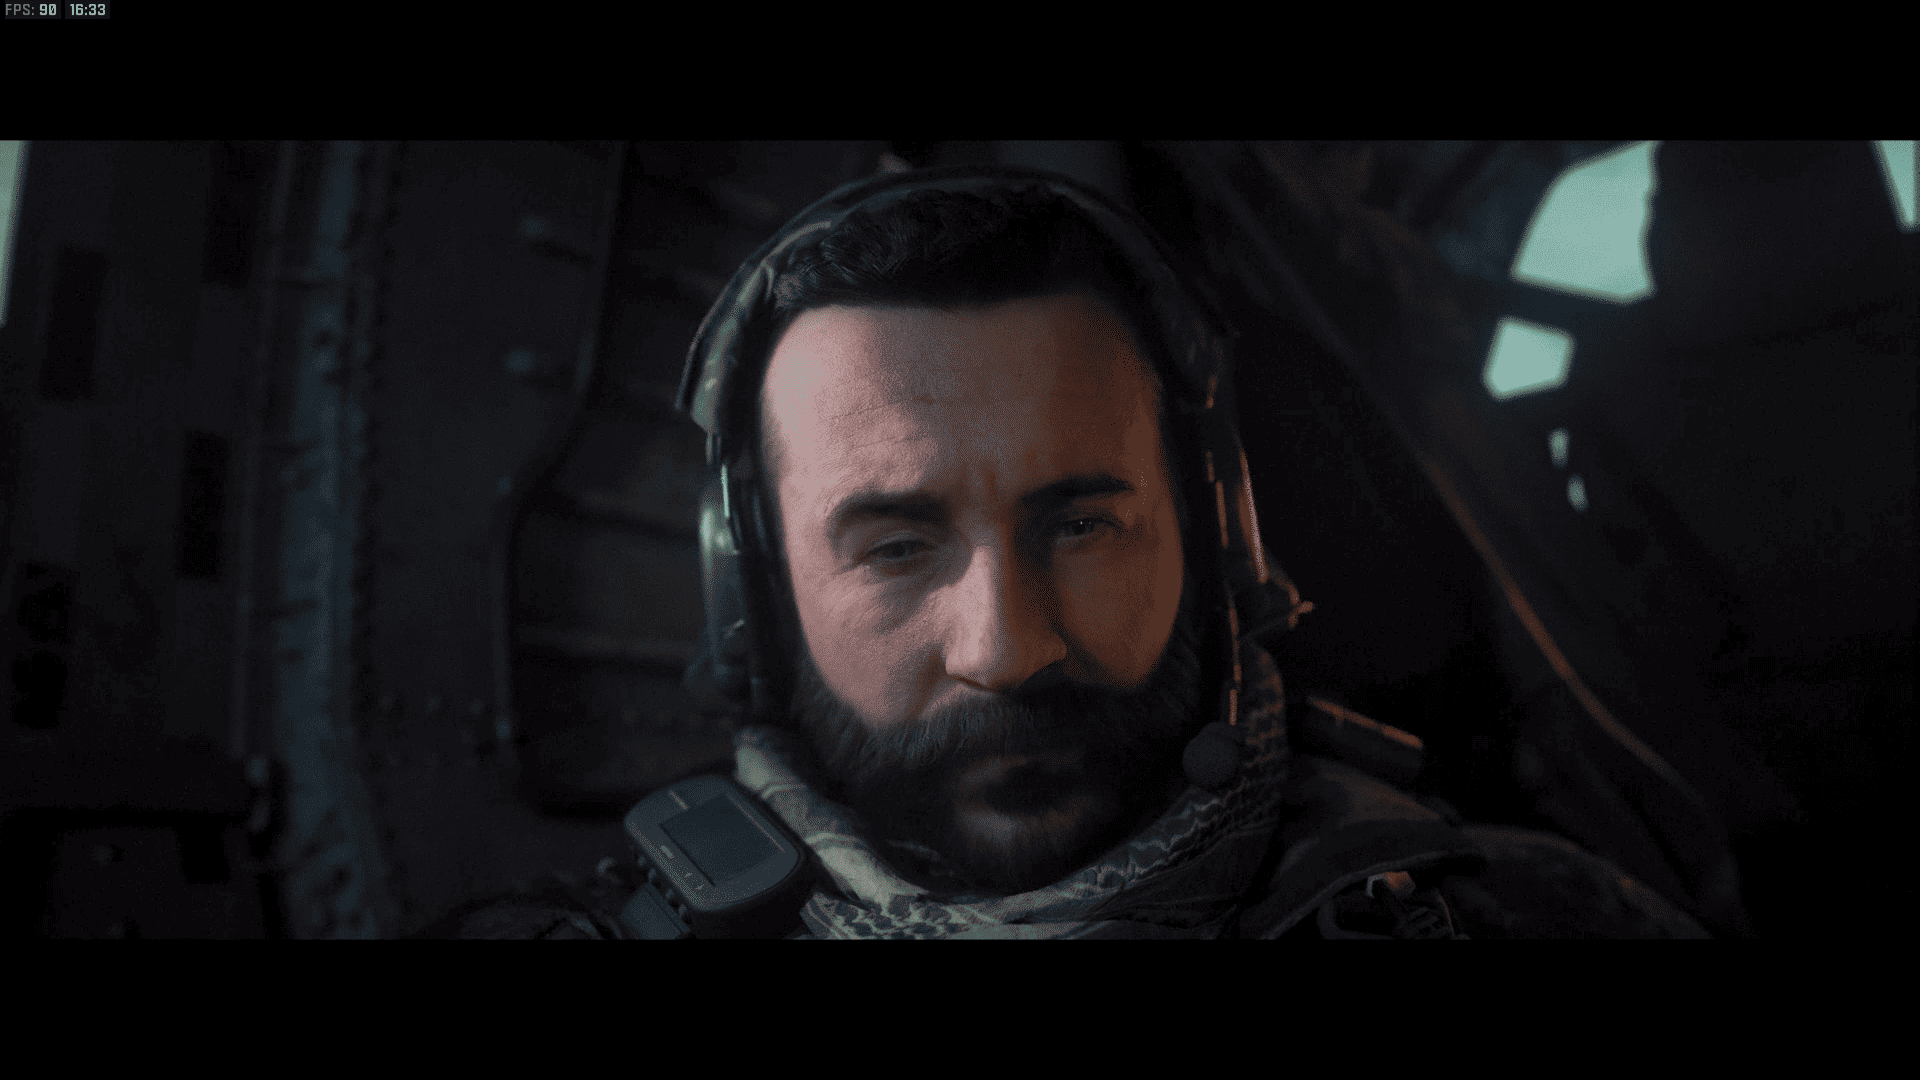 Modern Warfare 3 Reactor: Captain Price looking rough inside a helicopter.